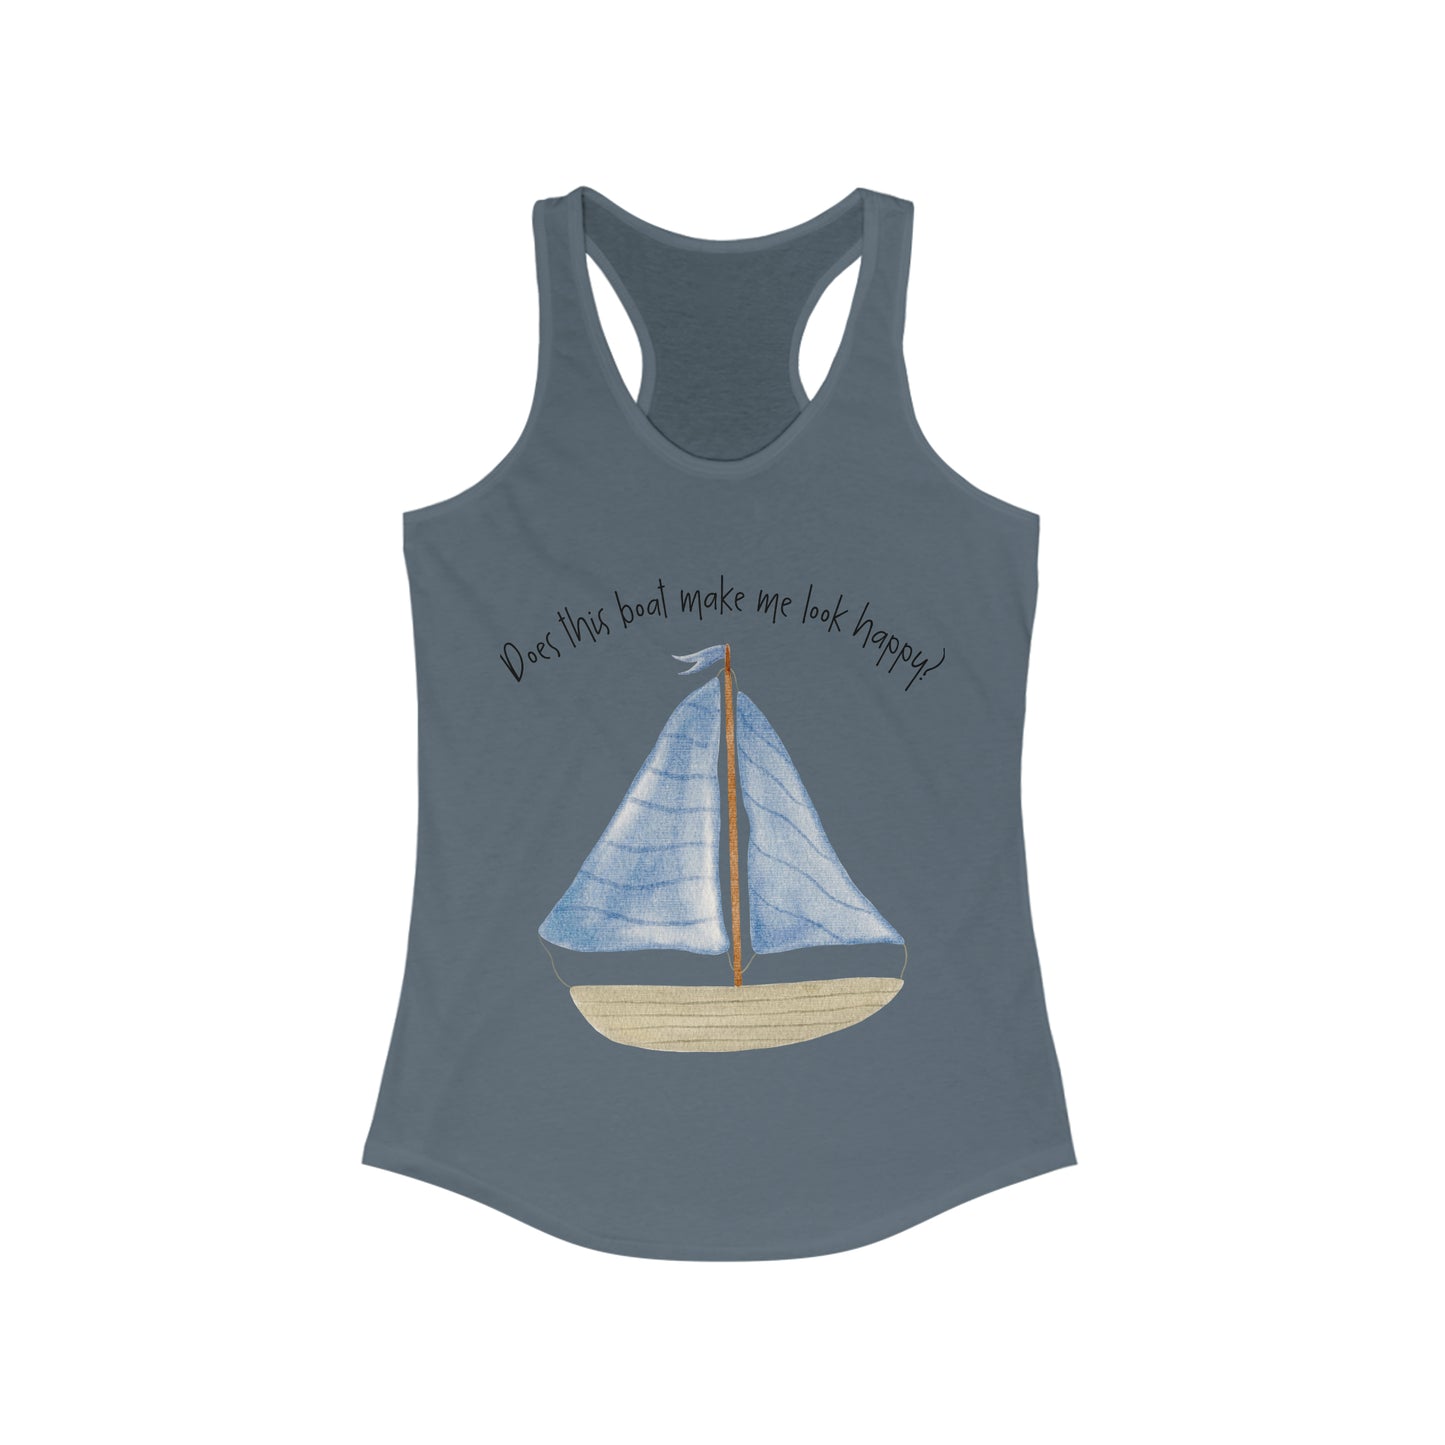 Does this boat make me look happy? Women's Ideal Racerback Tank